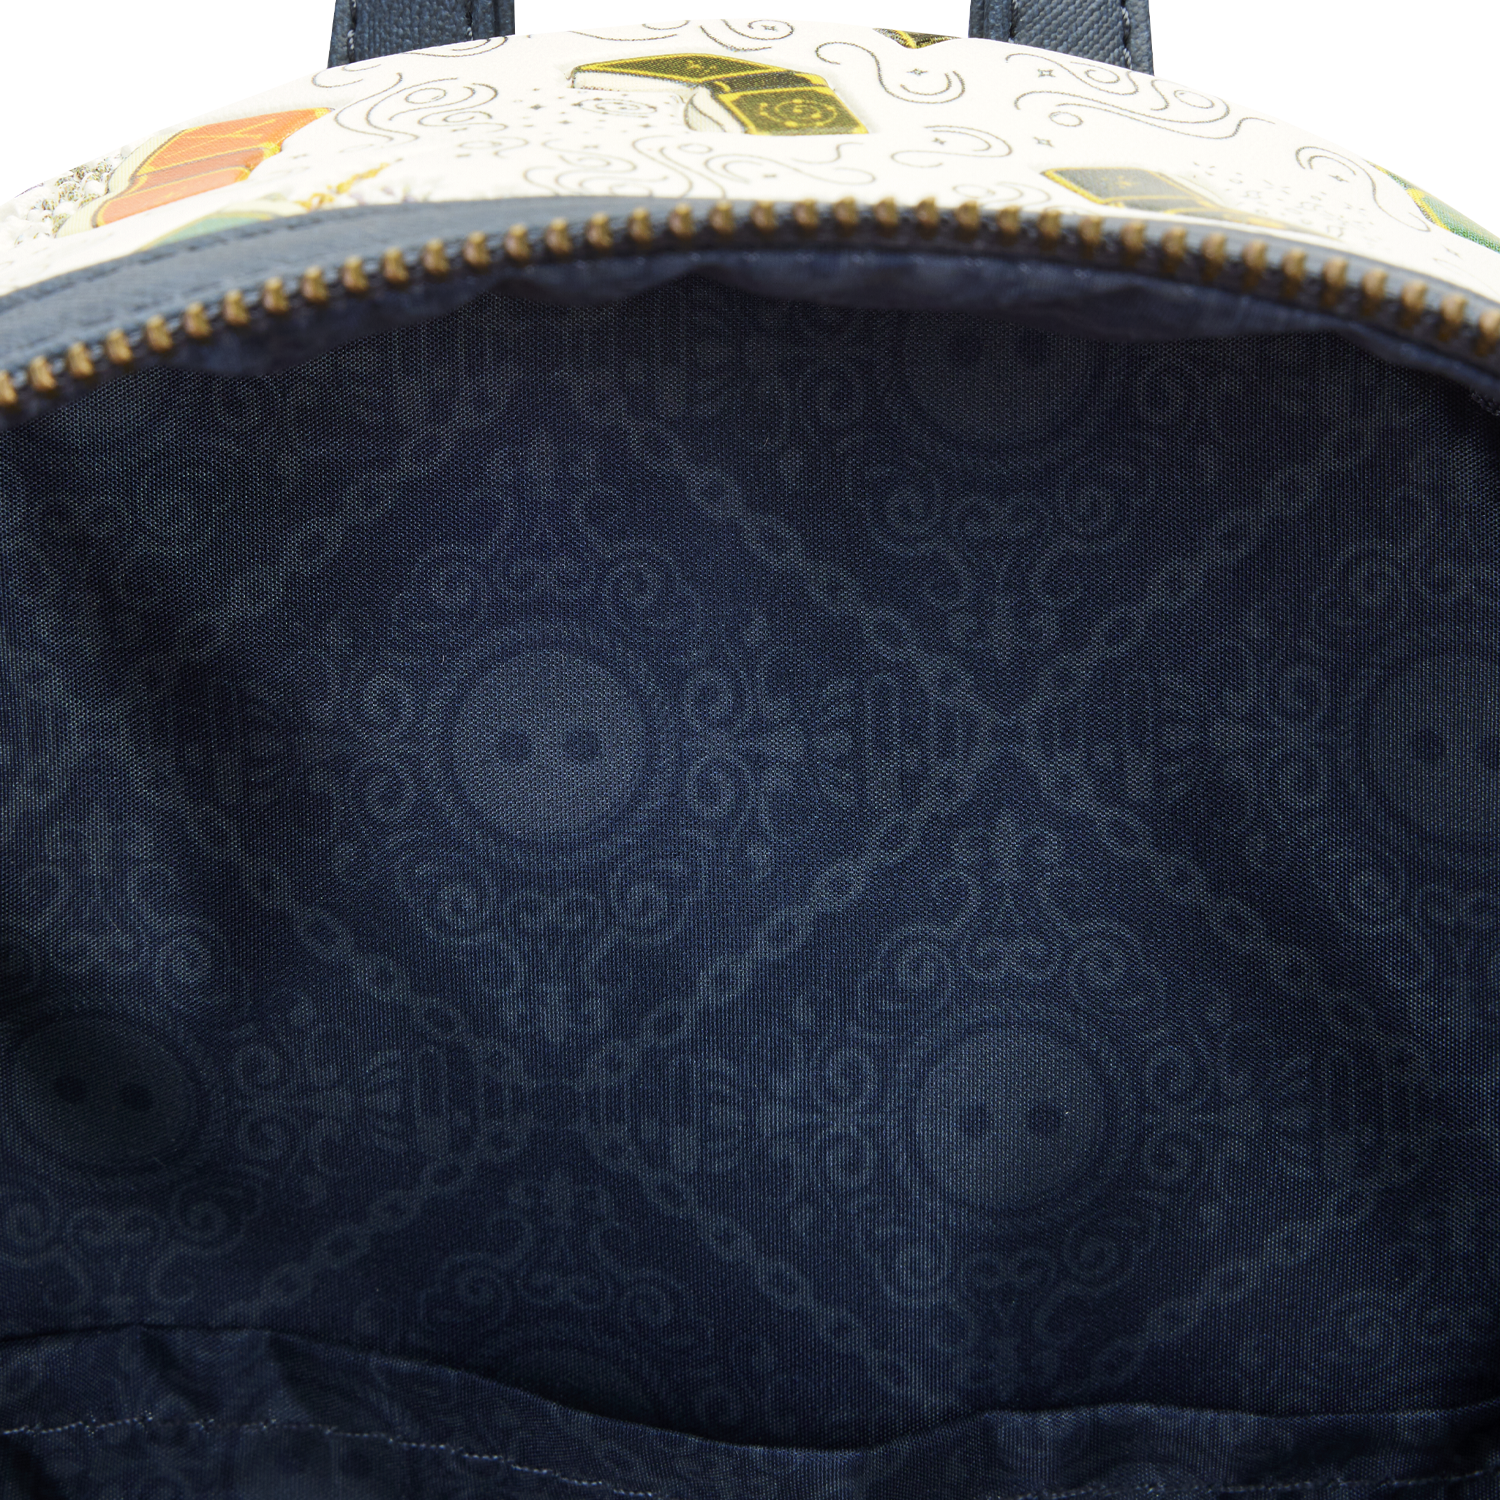 The inside lining coordinates with the print covering the outside of the backpack.